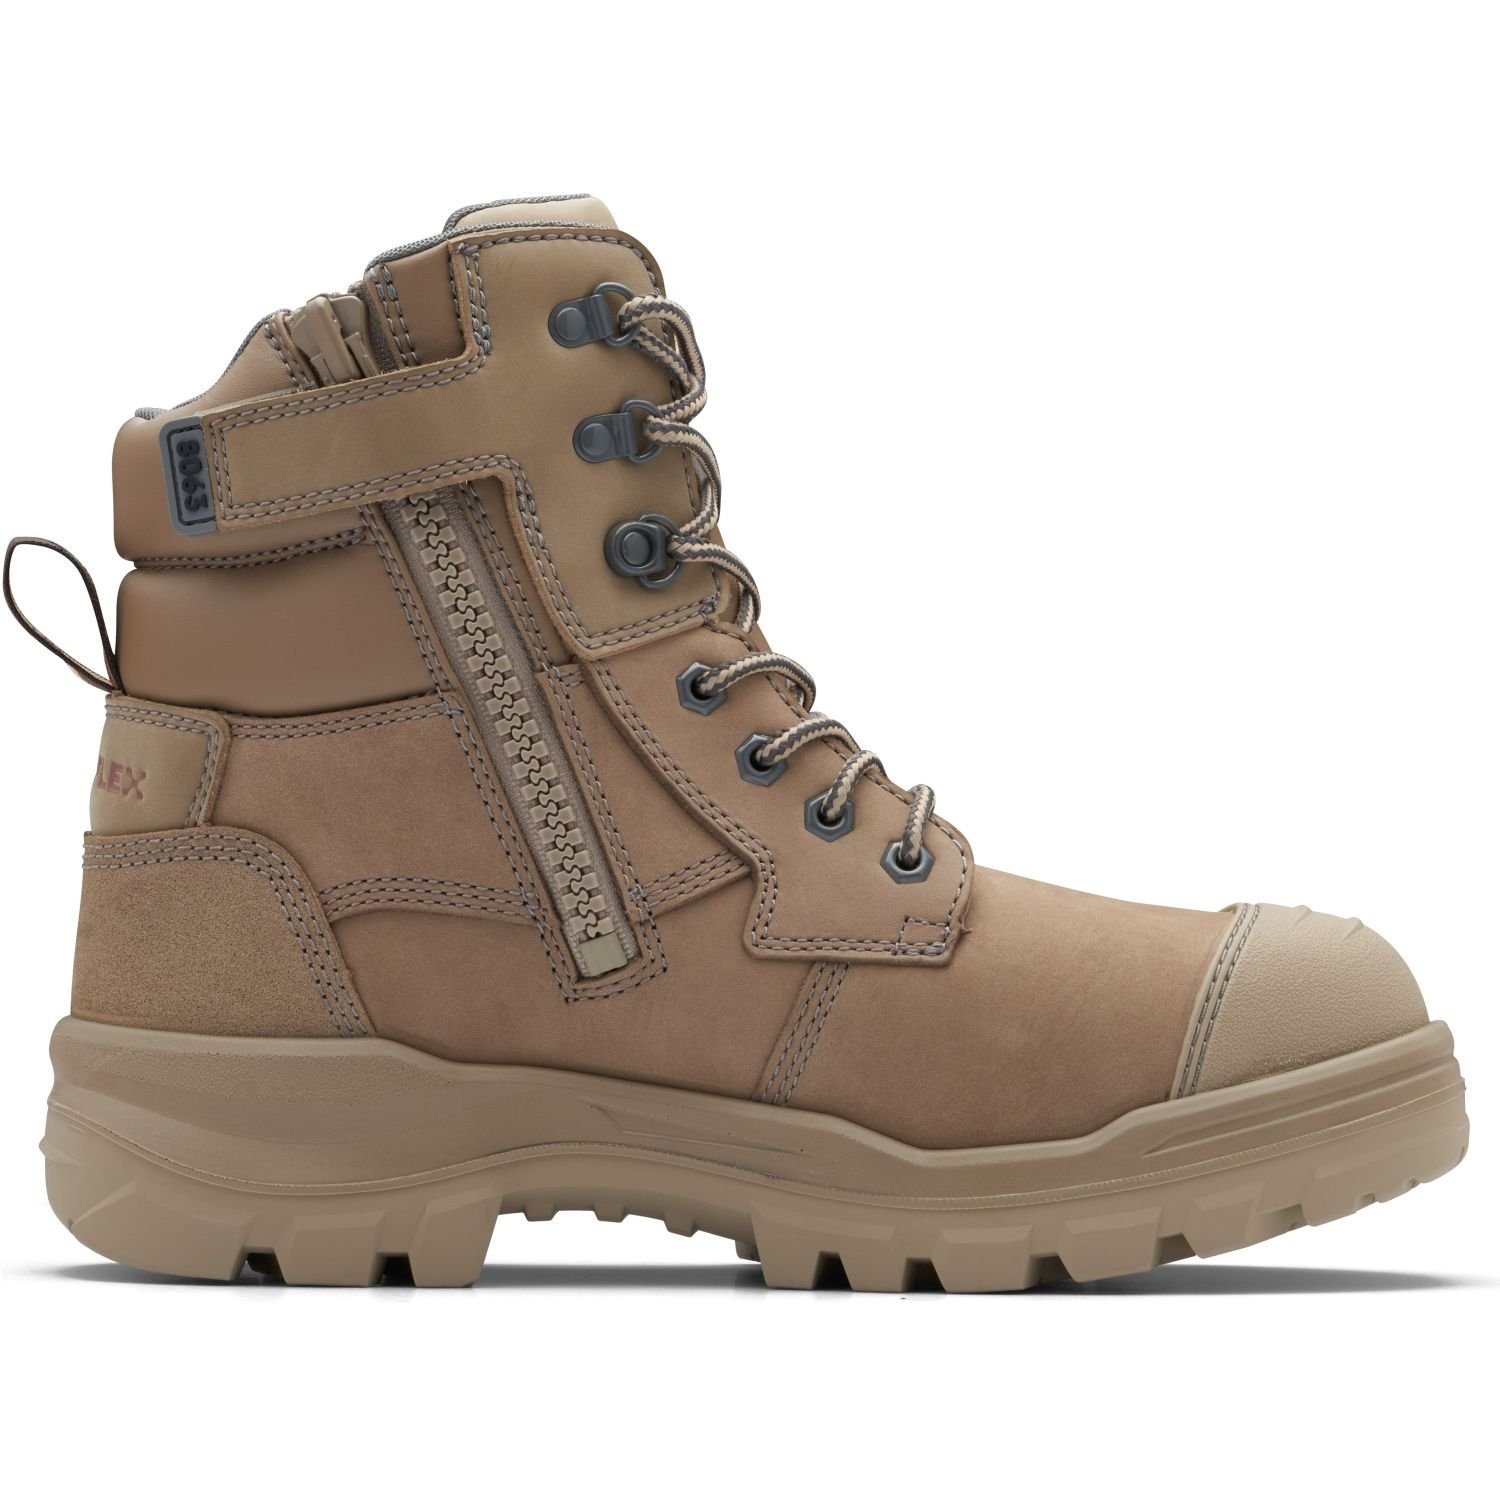 Blundstone 8063 Lace Up/Zip TPU Safety Boot Stone